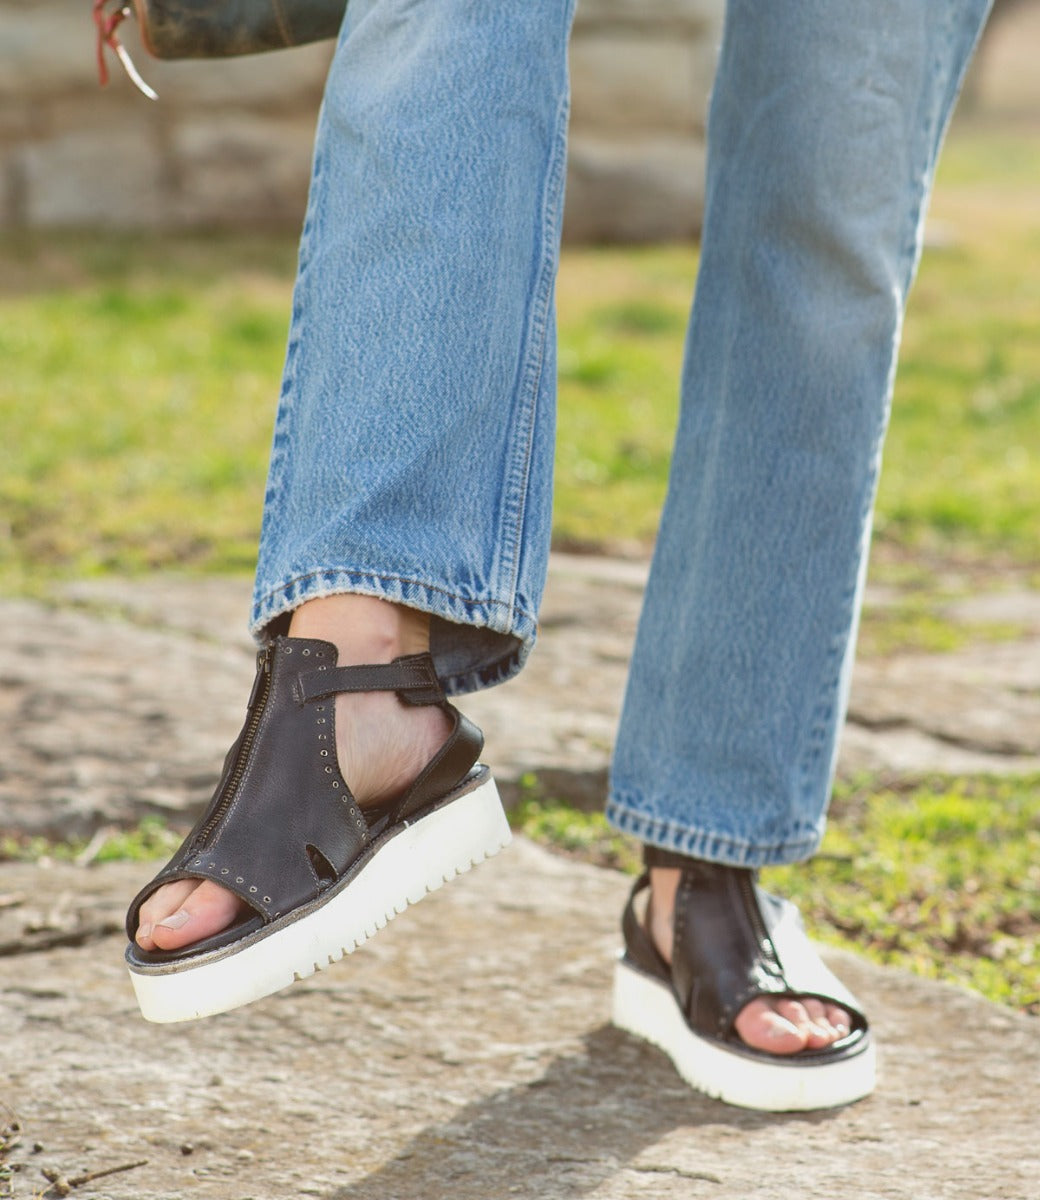 A person wearing Clancy sandals by Bed Stu, made of tan leather with a white sole.